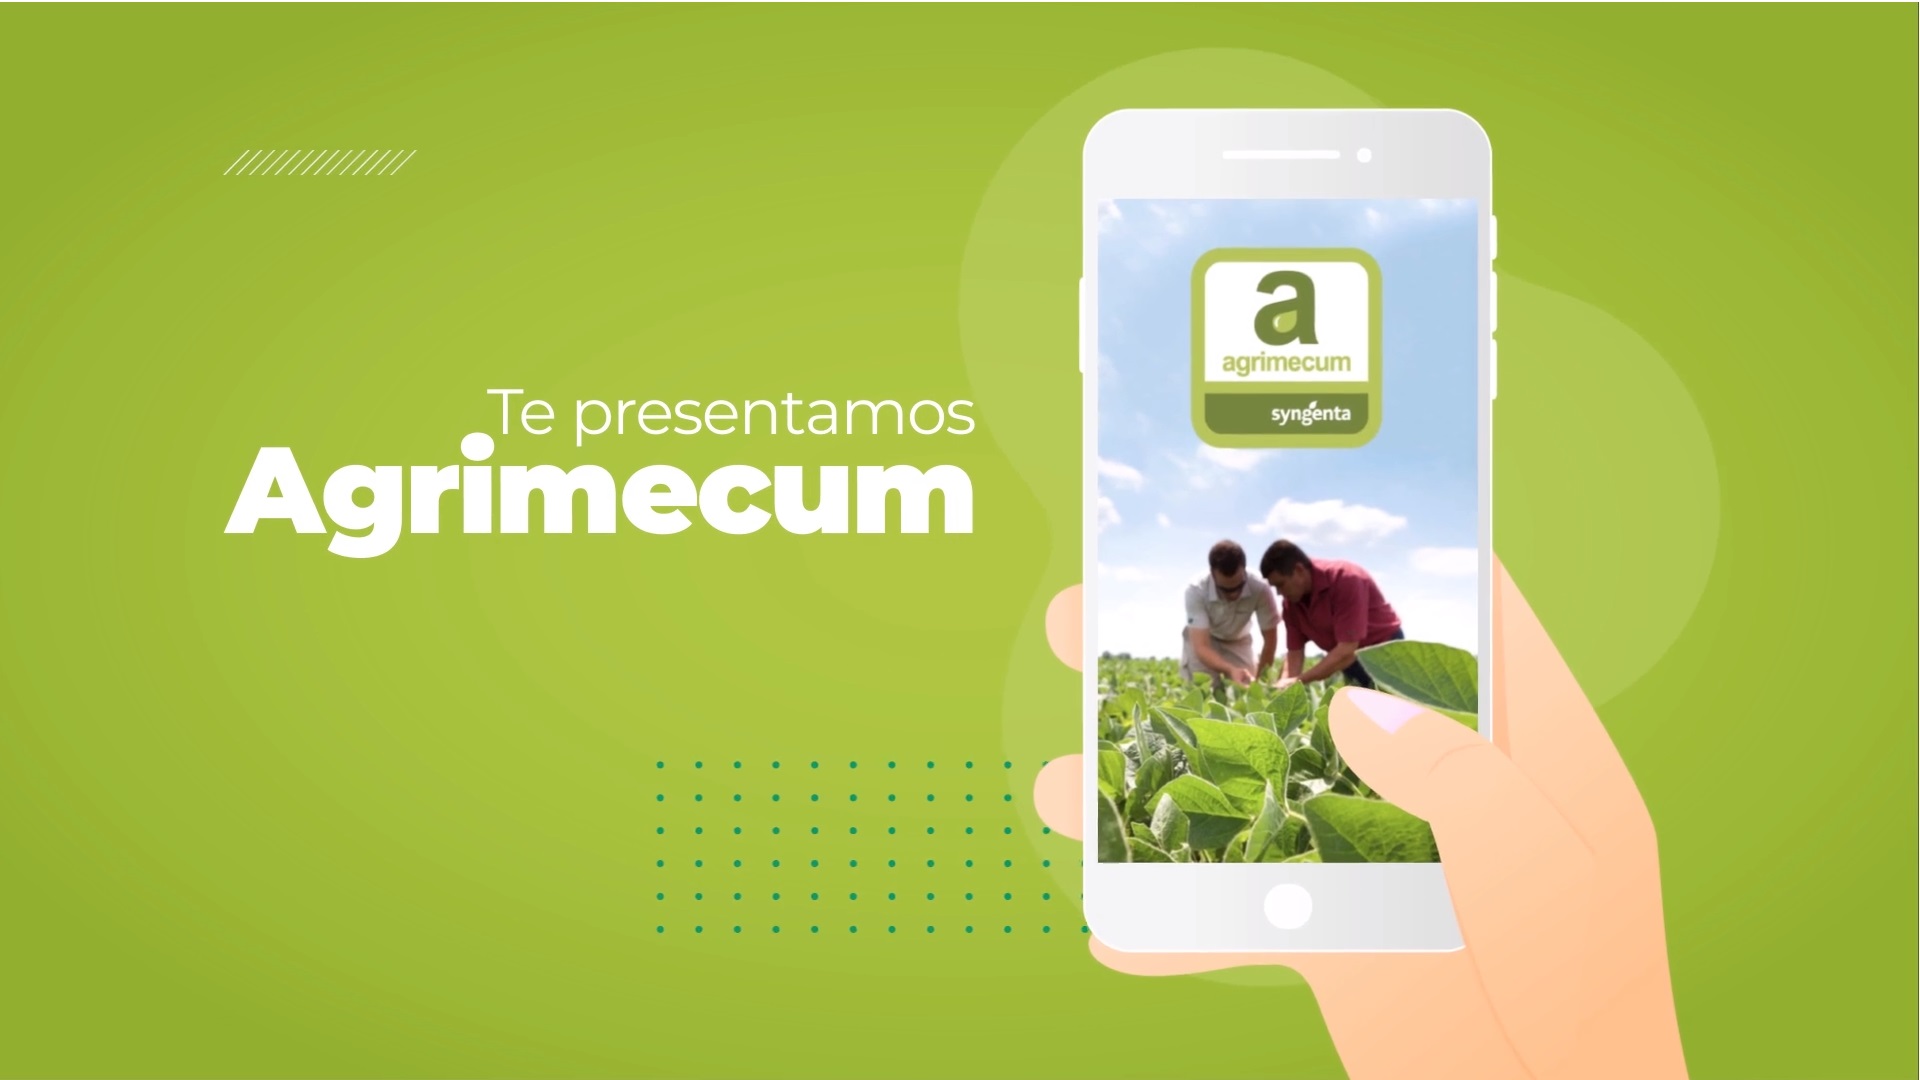 Agrimecum a solution by Syngenta a leading science-based agtech company